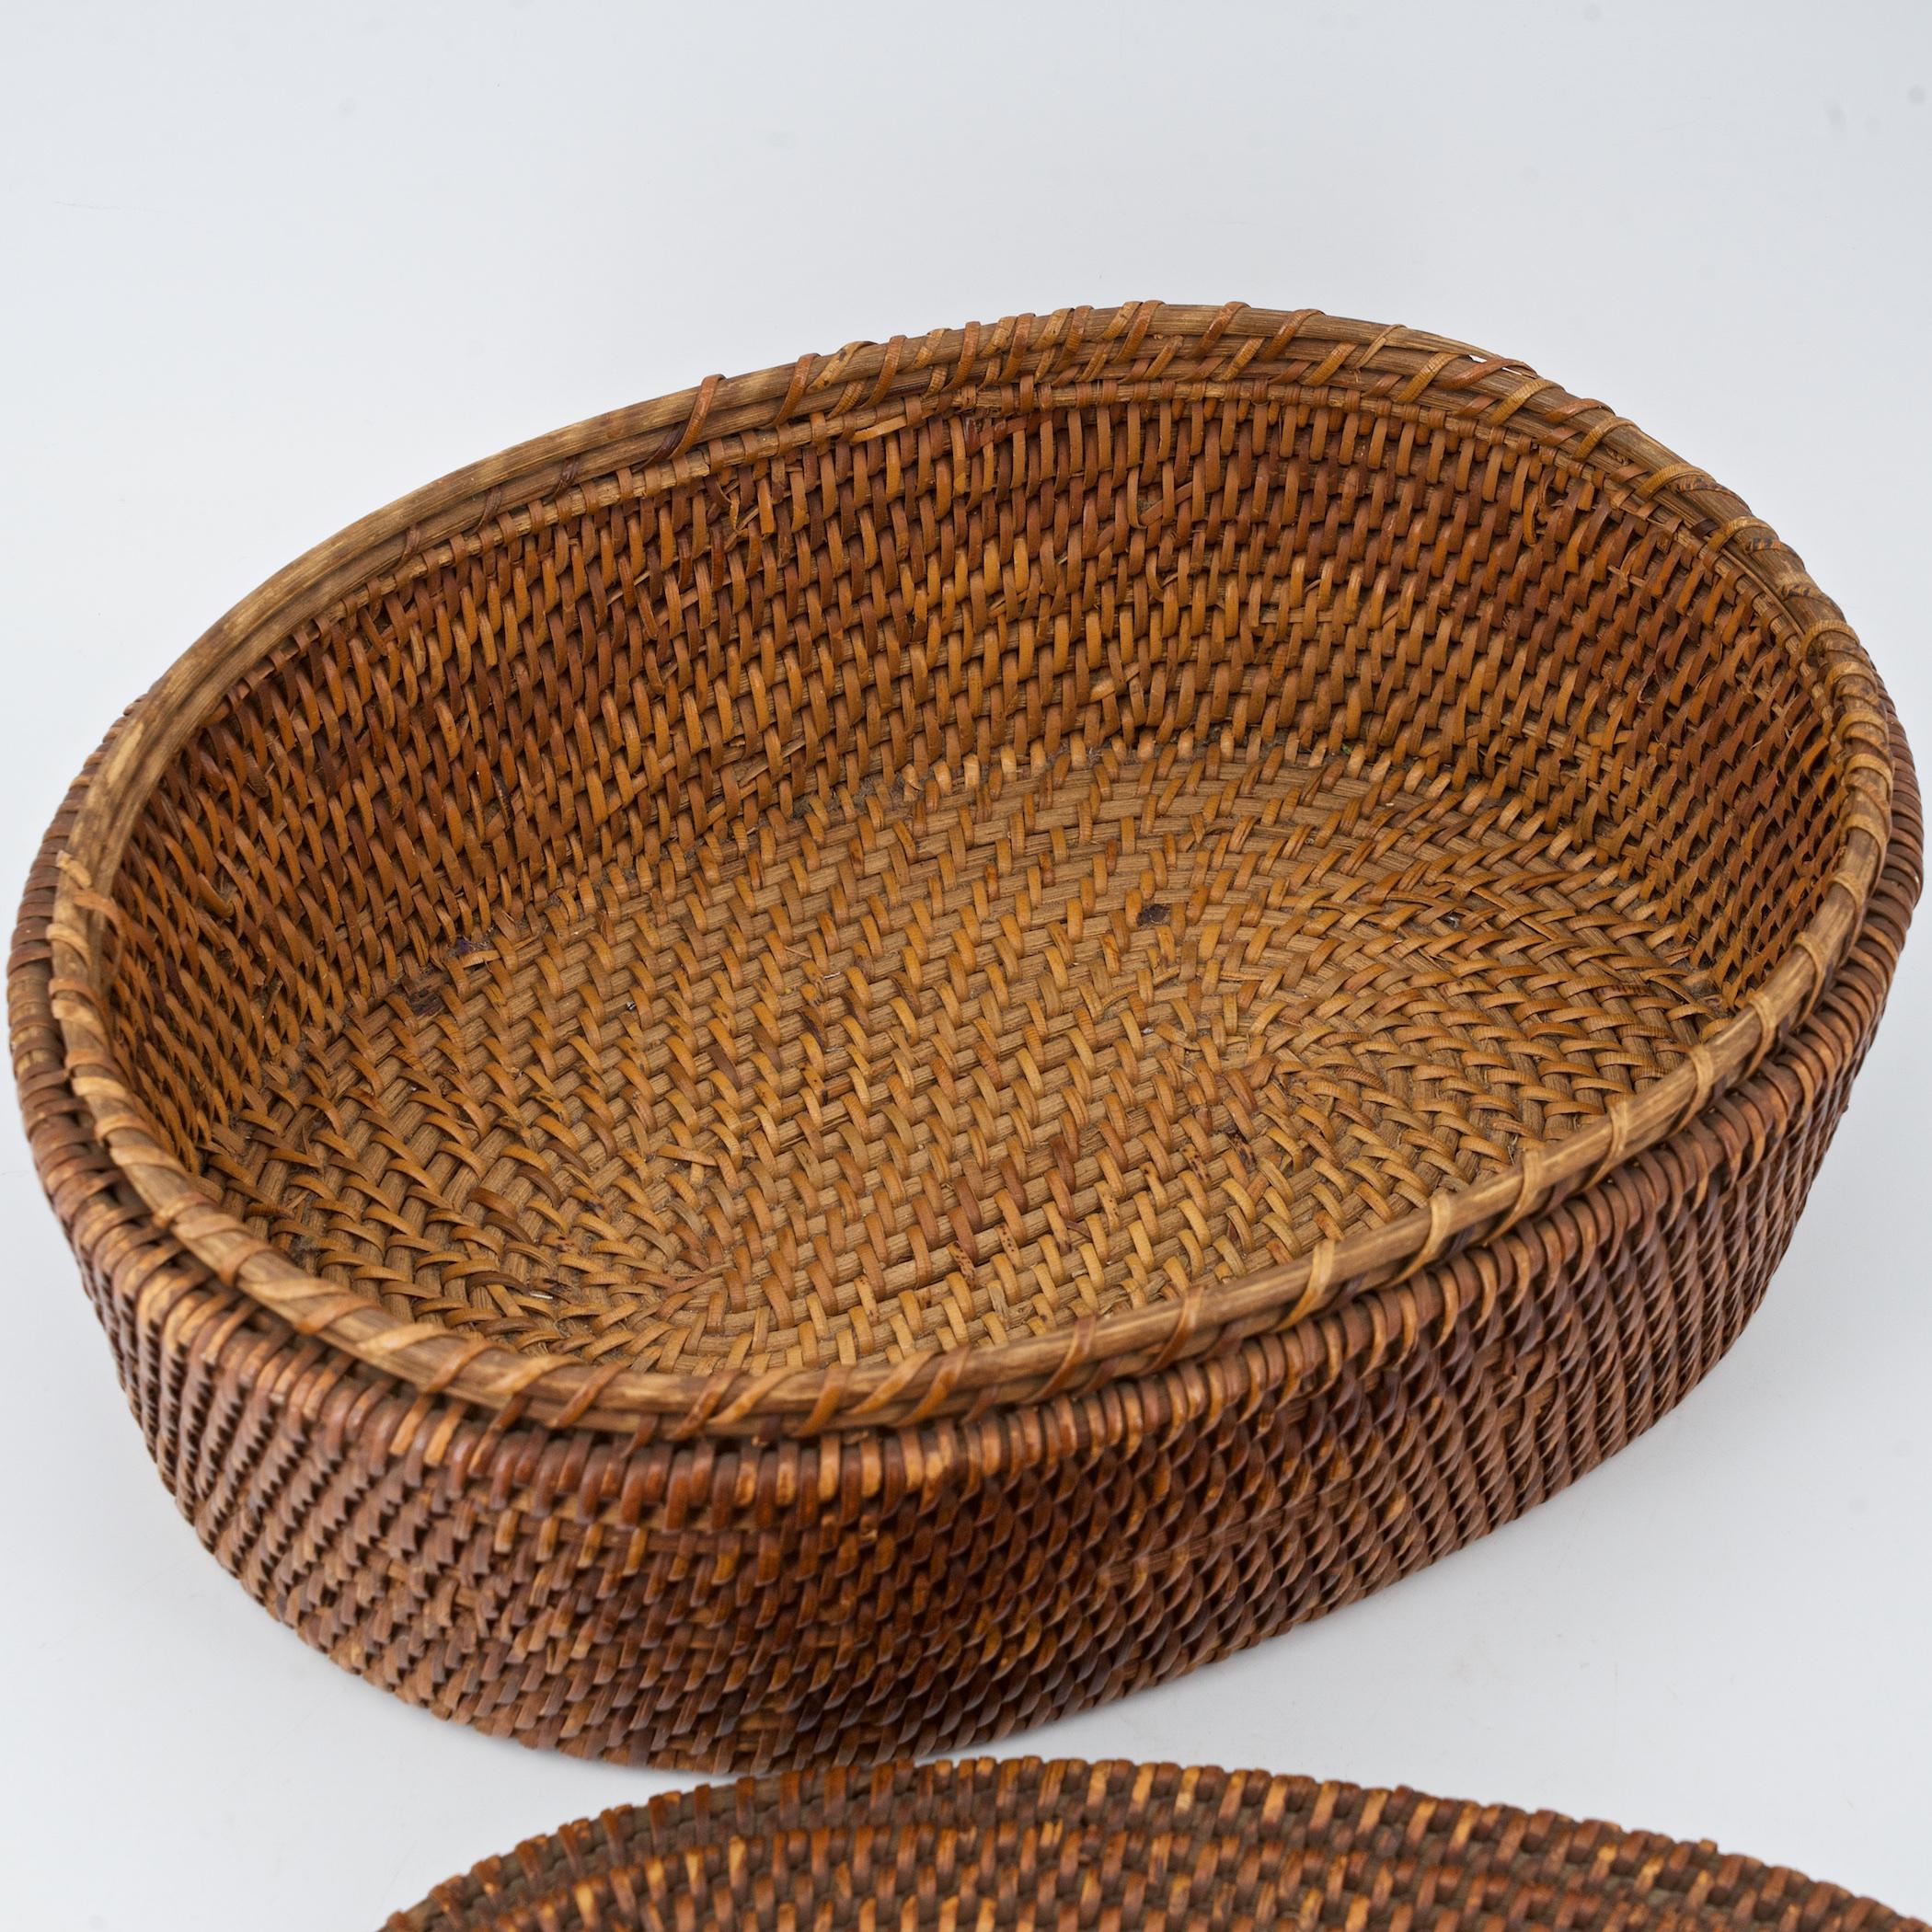 Native American Indian Woven Coiled Lidded Oval Basket 3